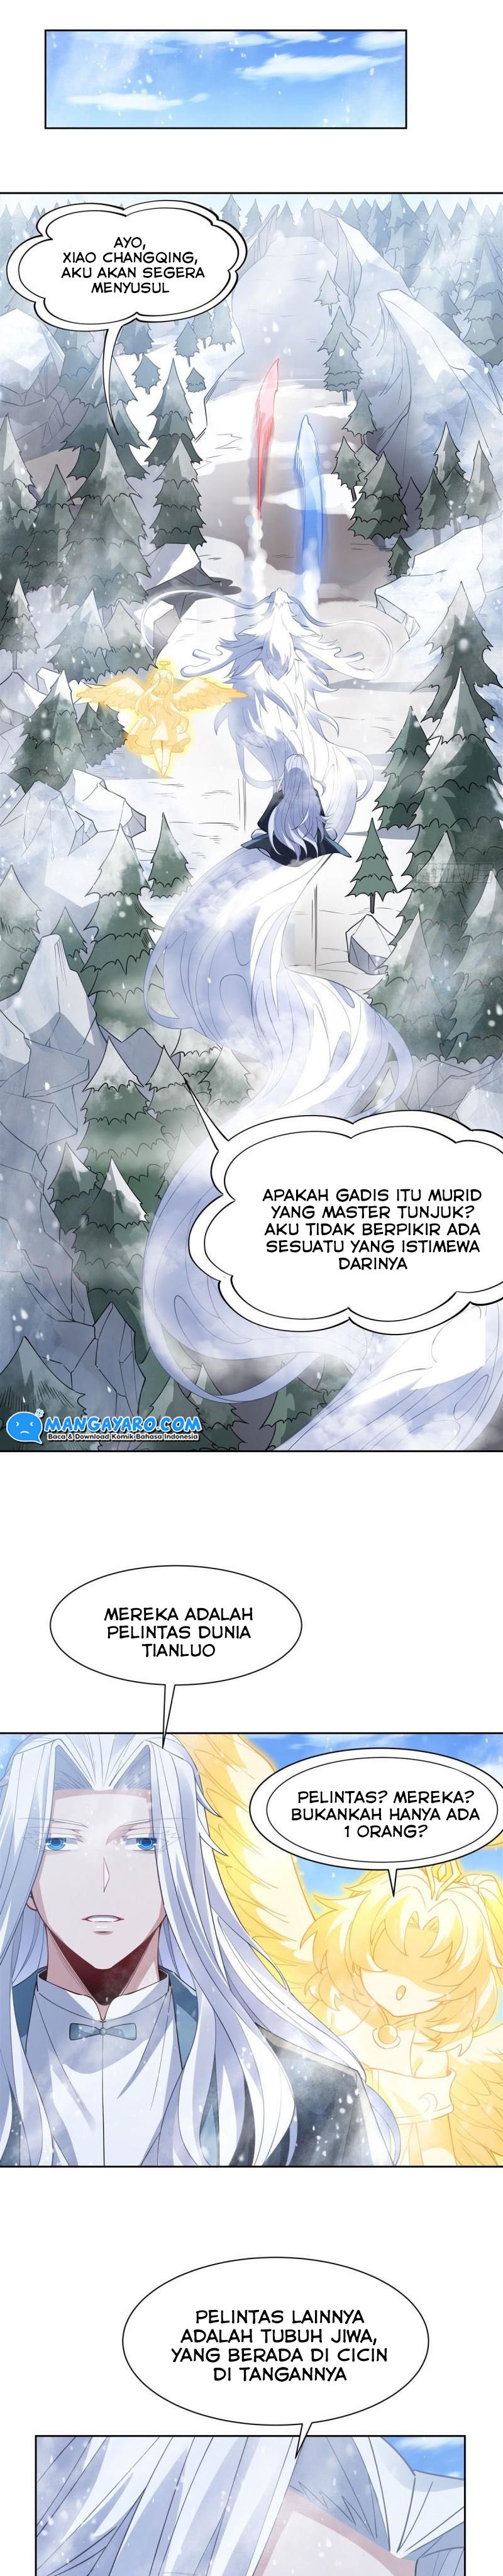 Dilarang COPAS - situs resmi www.mangacanblog.com - Komik my female apprentices are all big shots from the future 046 - chapter 46 47 Indonesia my female apprentices are all big shots from the future 046 - chapter 46 Terbaru 10|Baca Manga Komik Indonesia|Mangacan